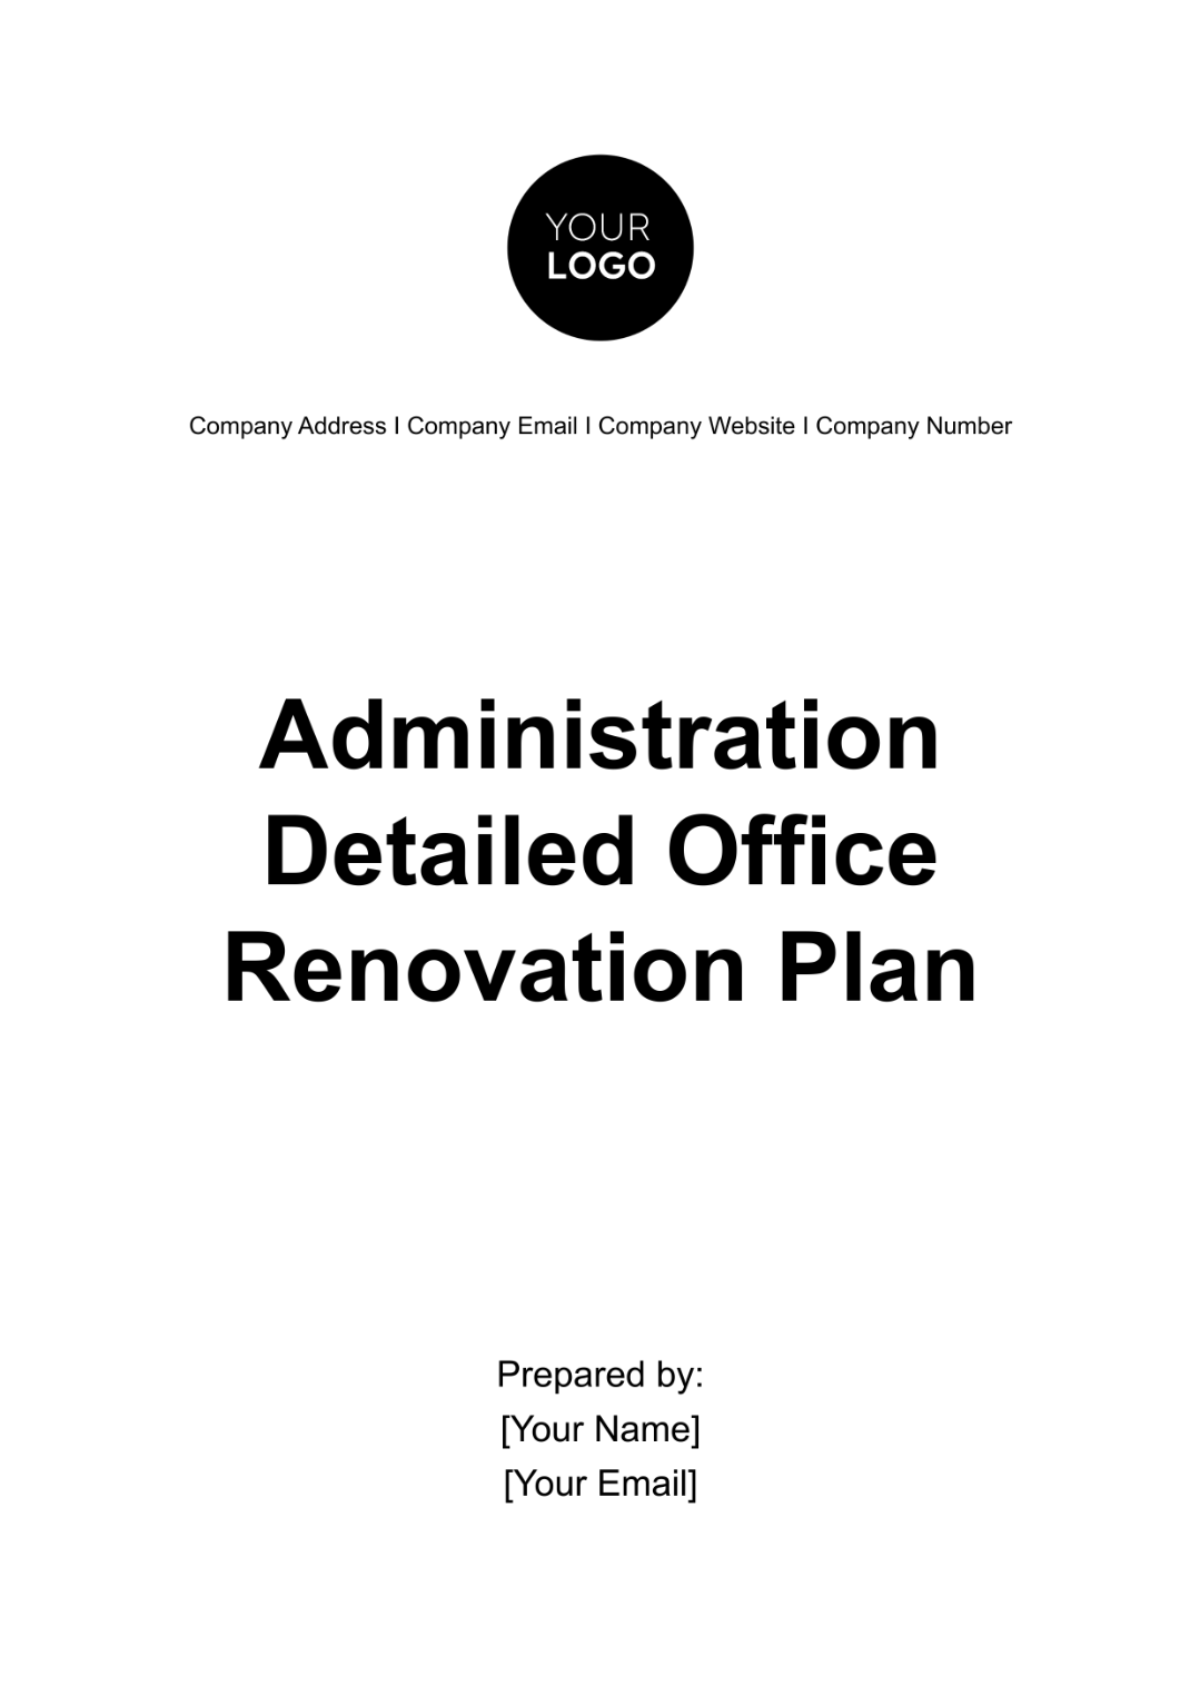 Administration Detailed Office Renovation Plan Template